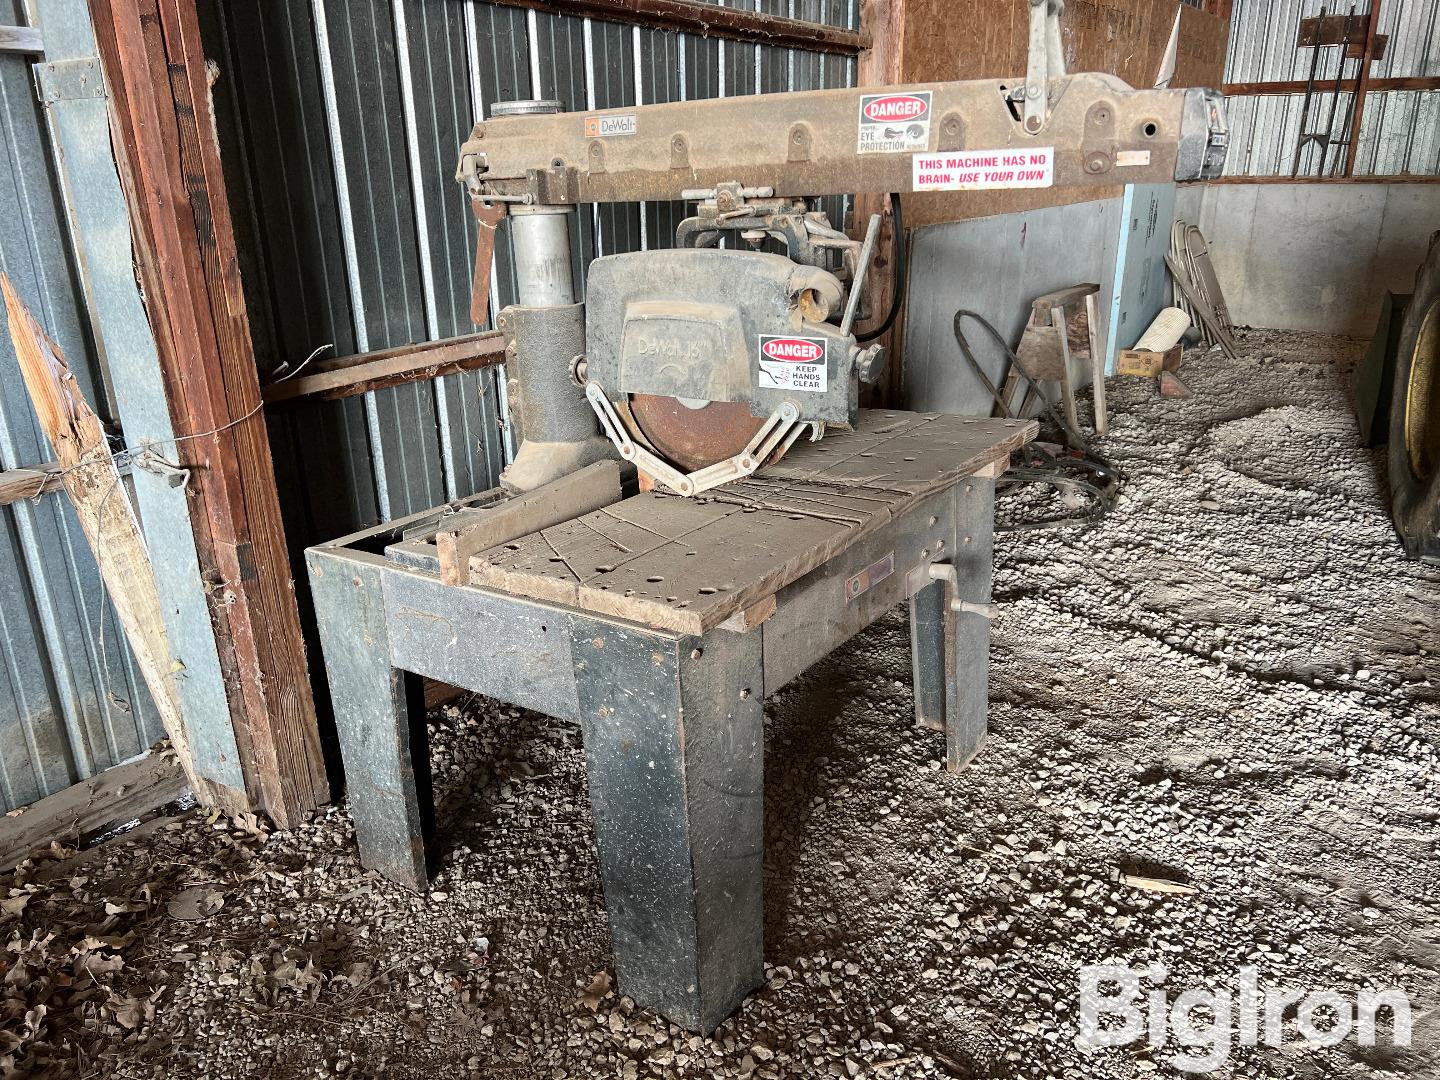 Sold at Auction: Black and Decker 7 1/4 Electric Hand Saw